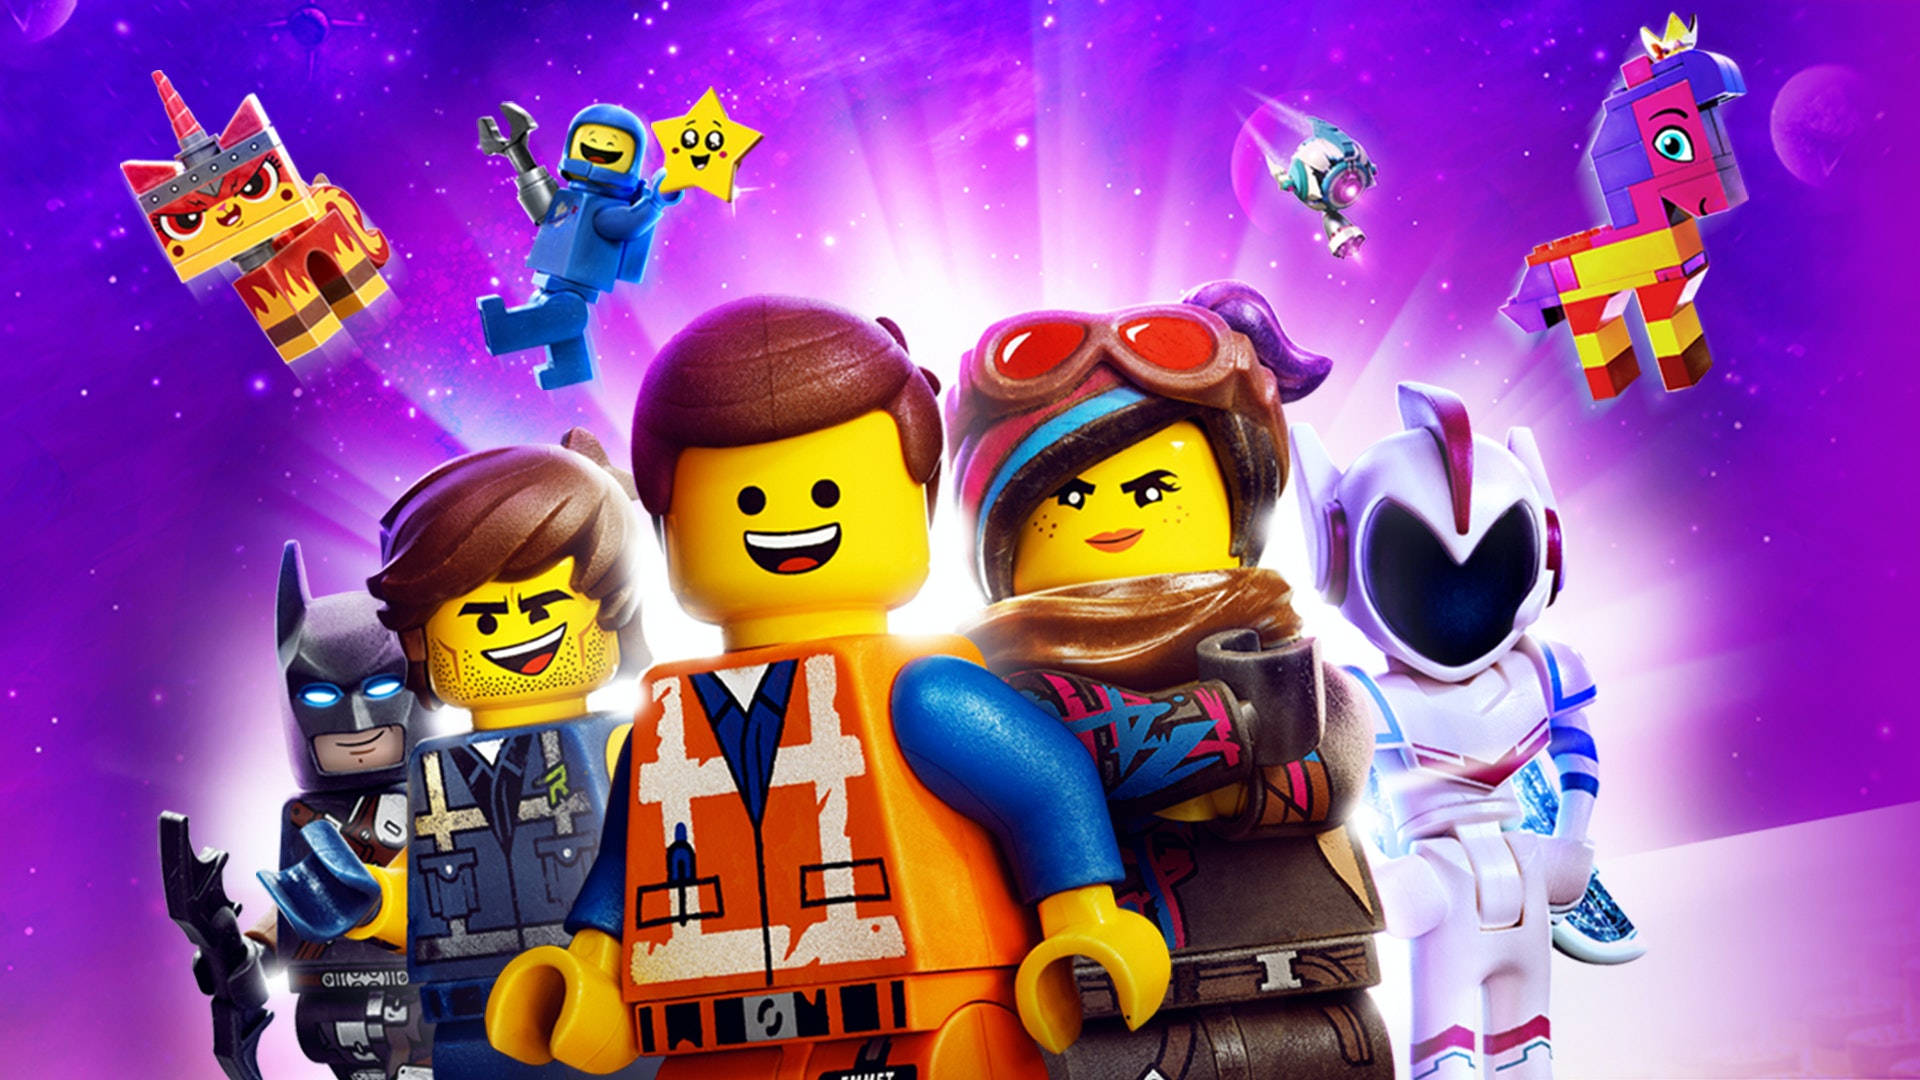 Download The Lego Movie 2 In Space Wallpaper